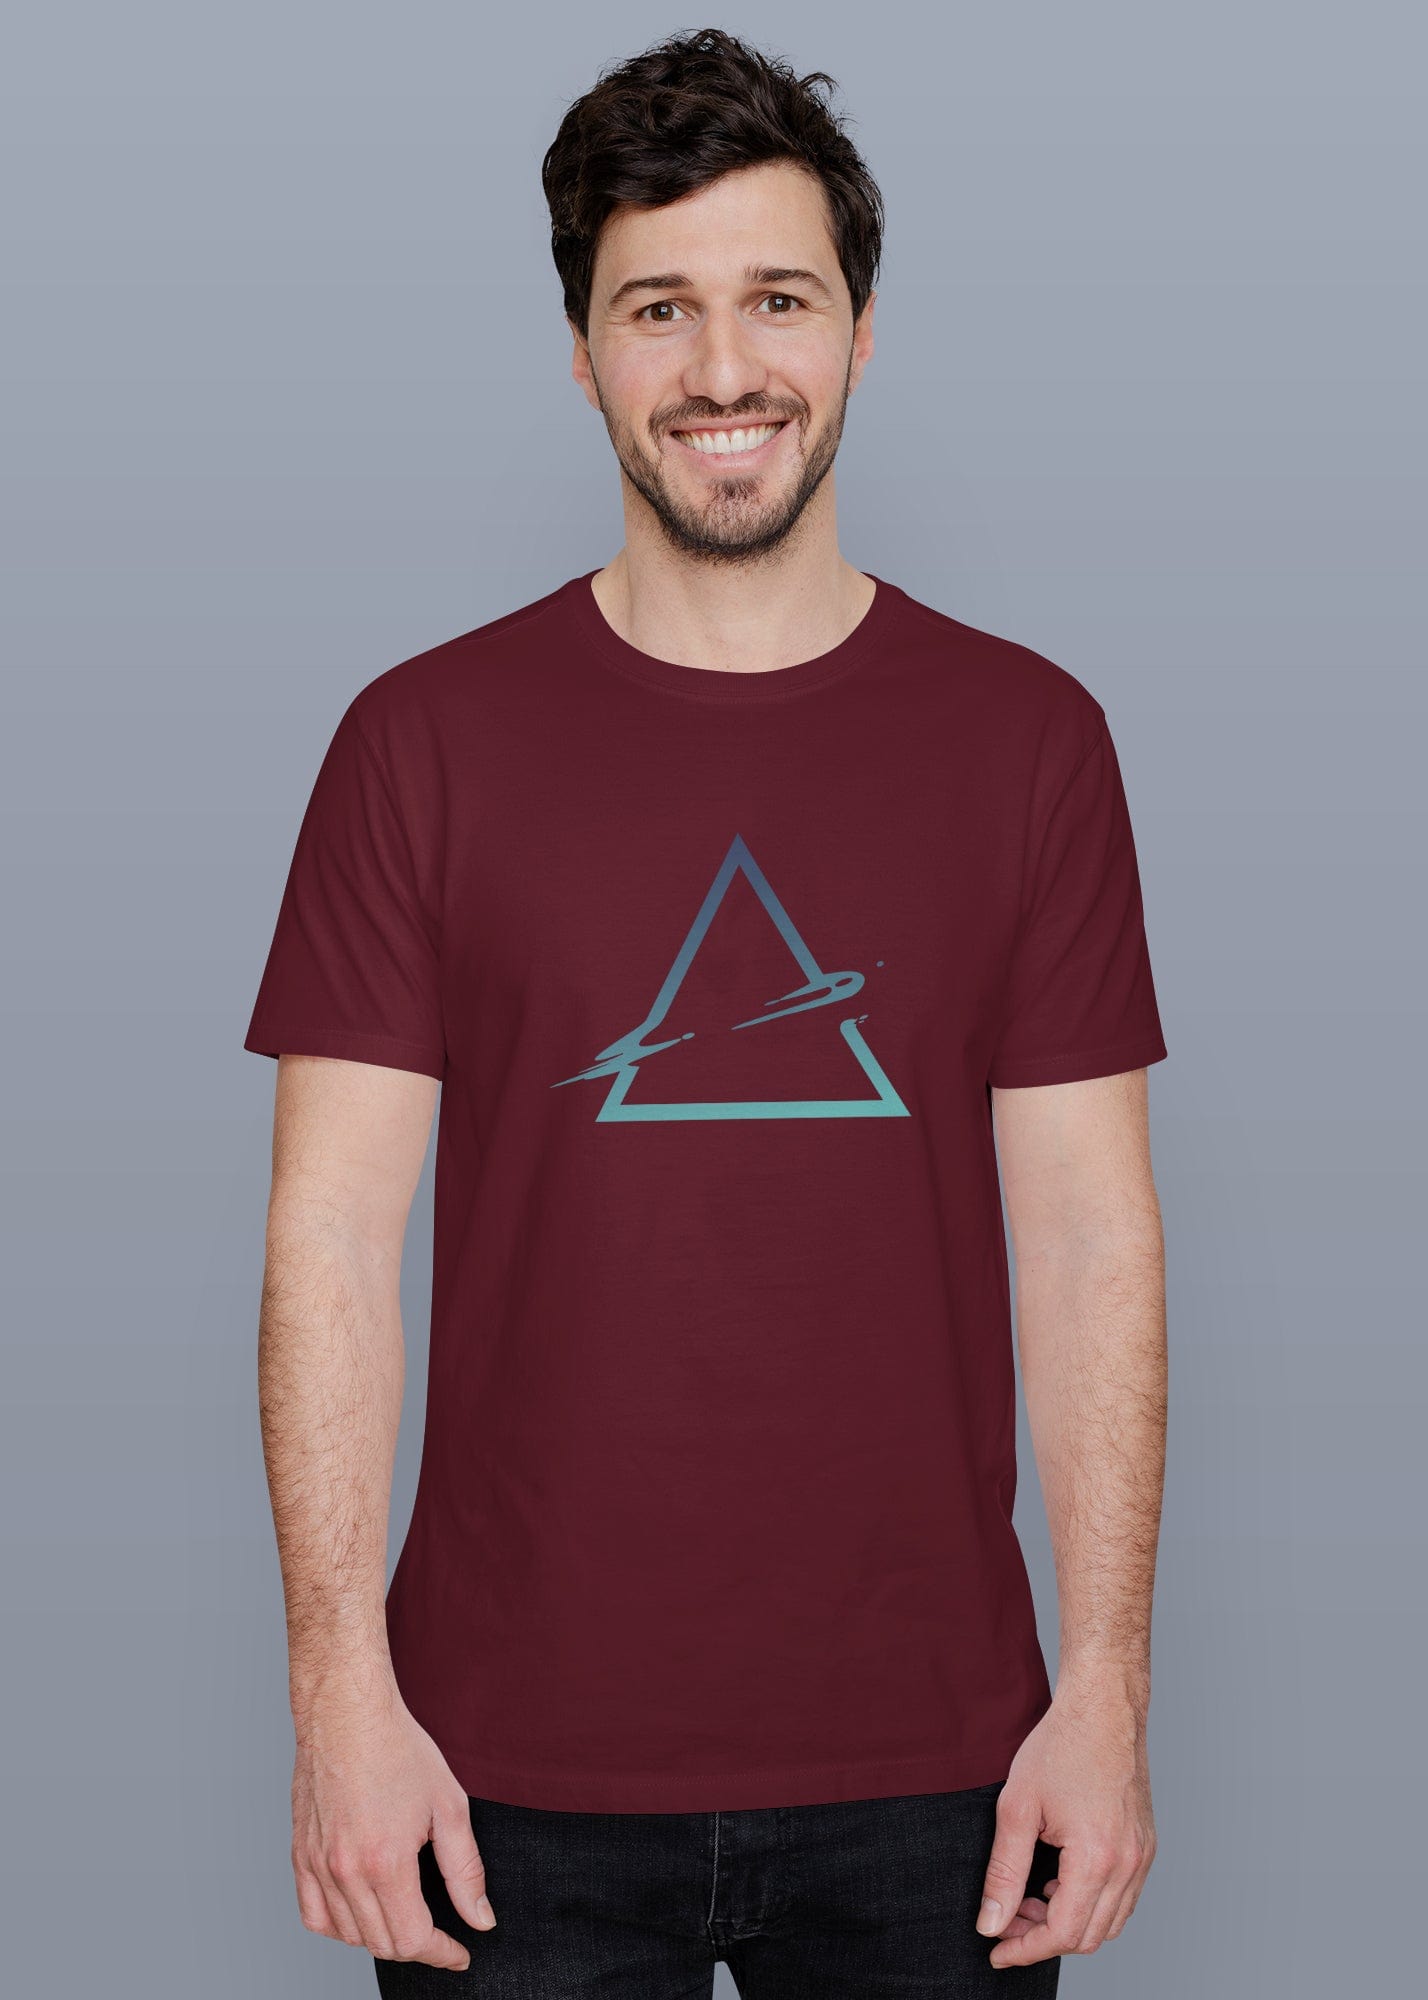 Abstract Triangle Printed Half Sleeve Premium Cotton T-shirt For Men